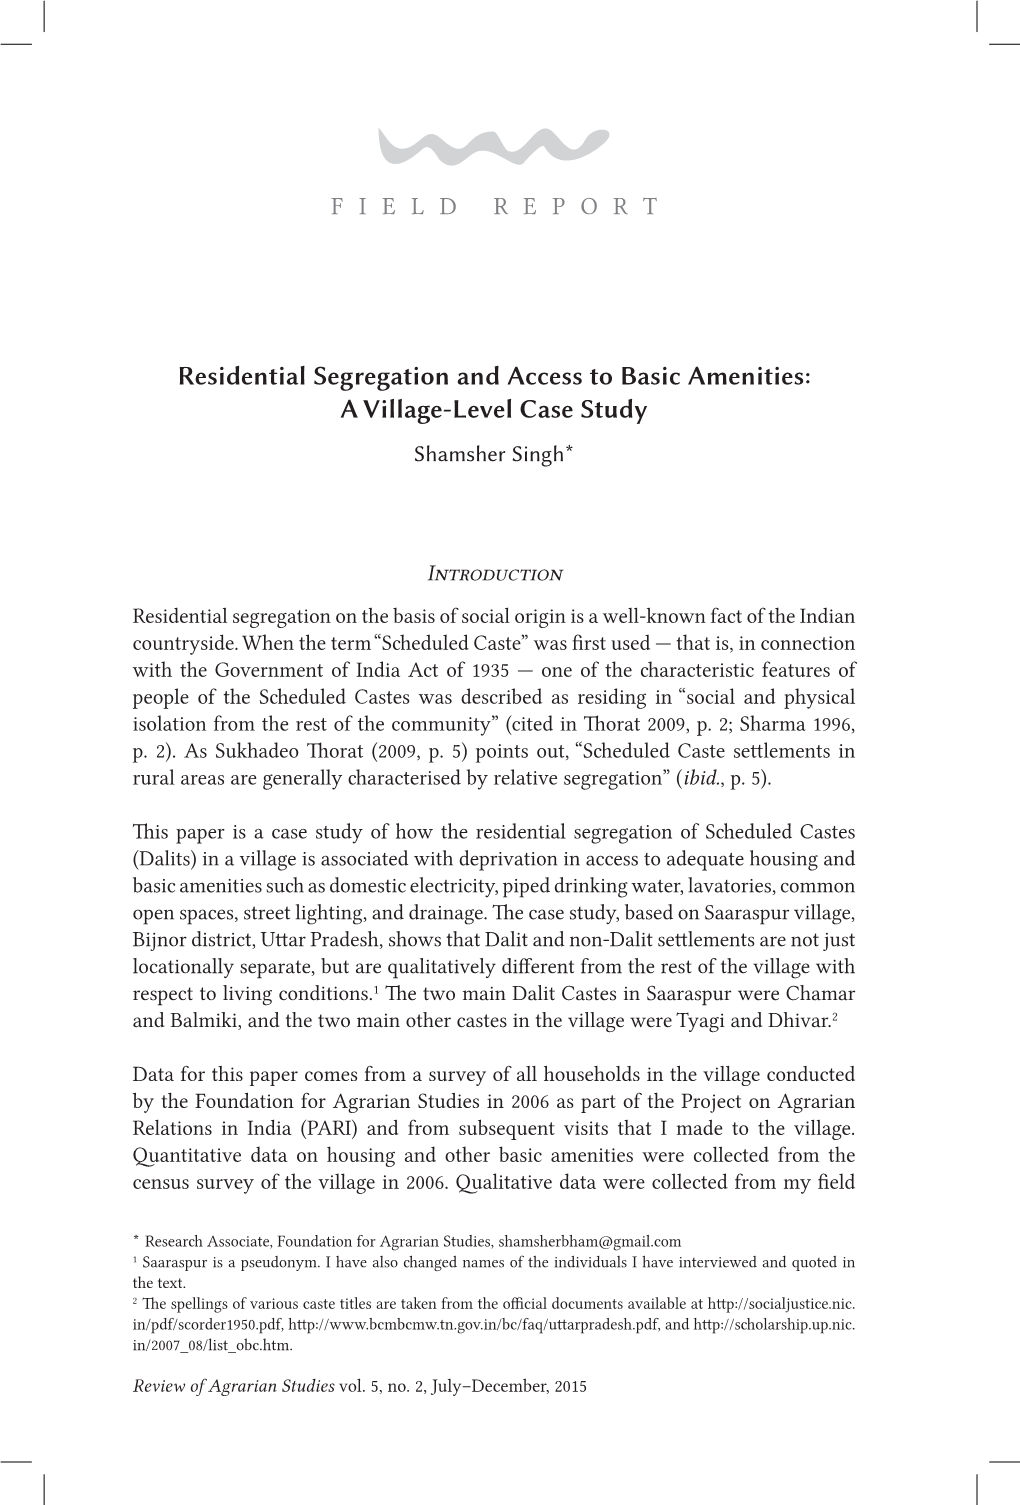 Residential Segregation and Access to Basic Amenities: a Village-Level Case Study Shamsher Singh*